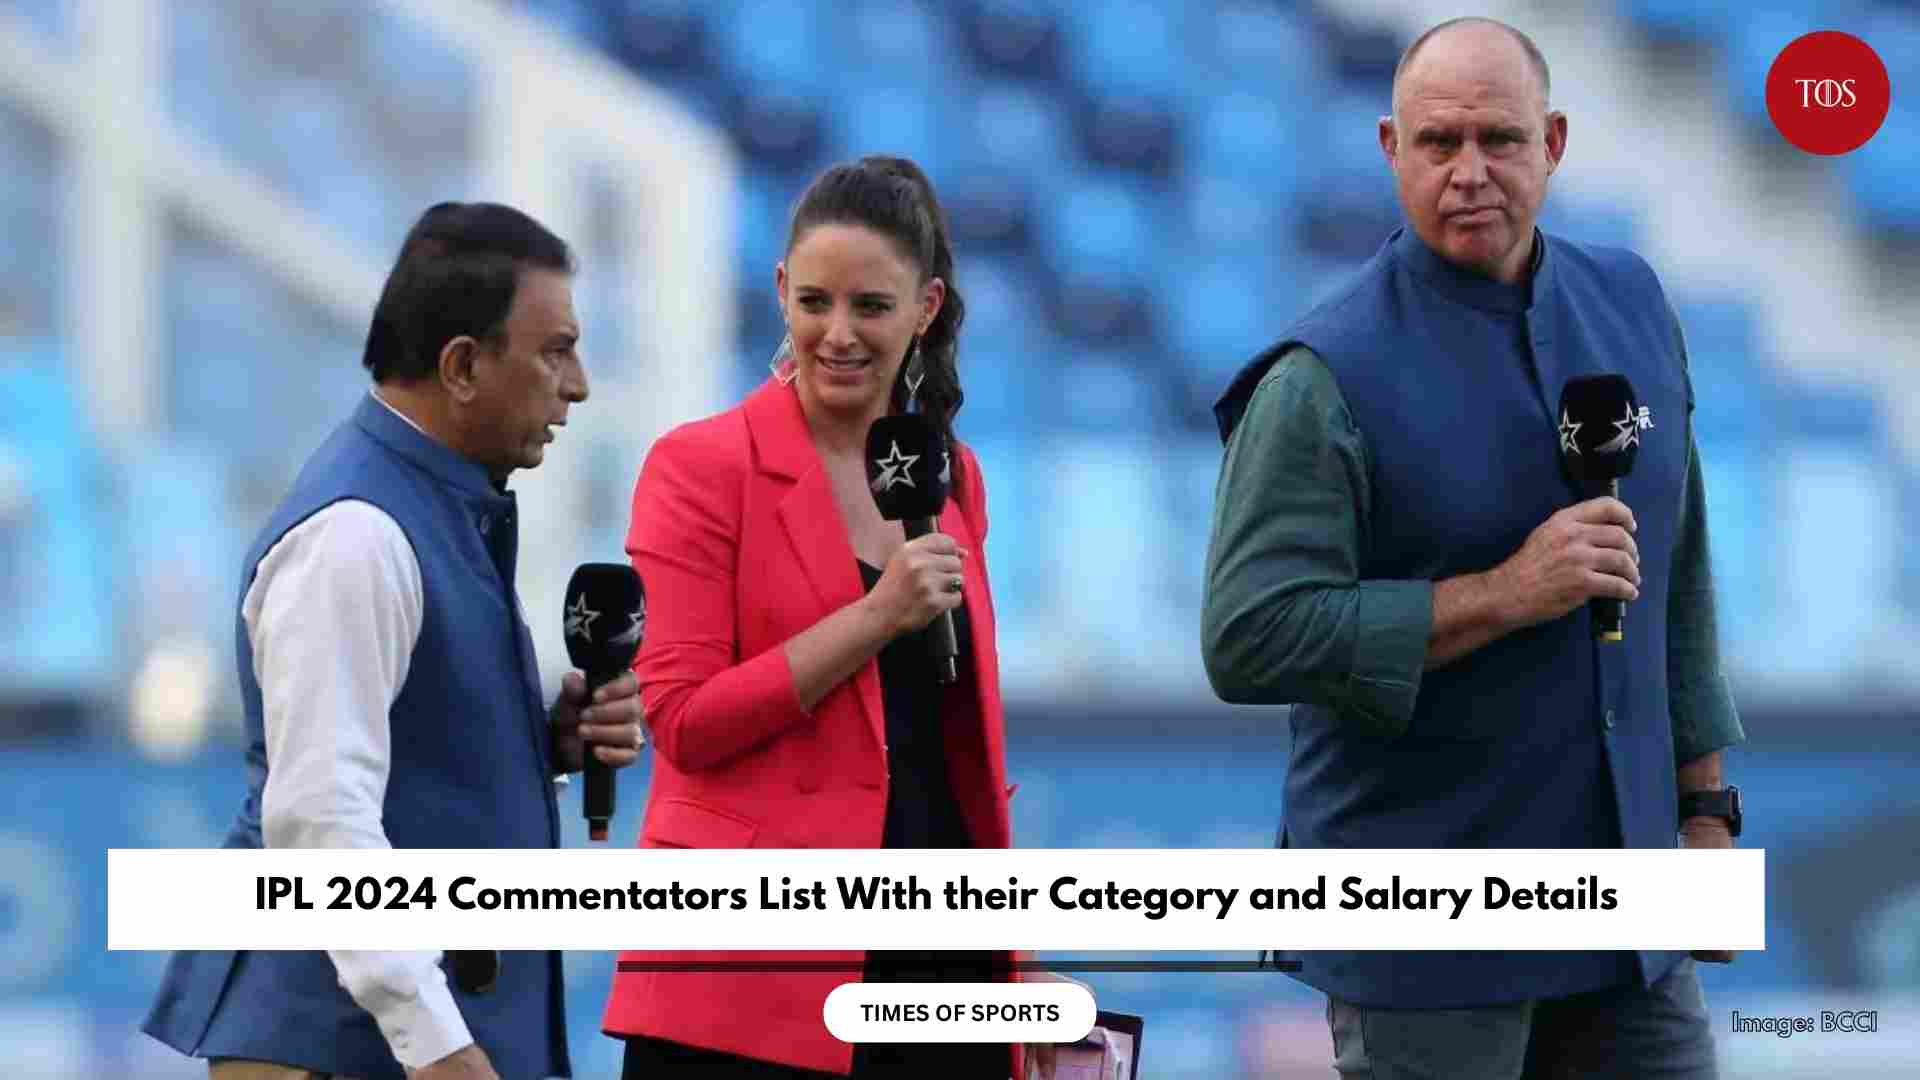 IPL 2024 Commentators List With their Category and Salary Details